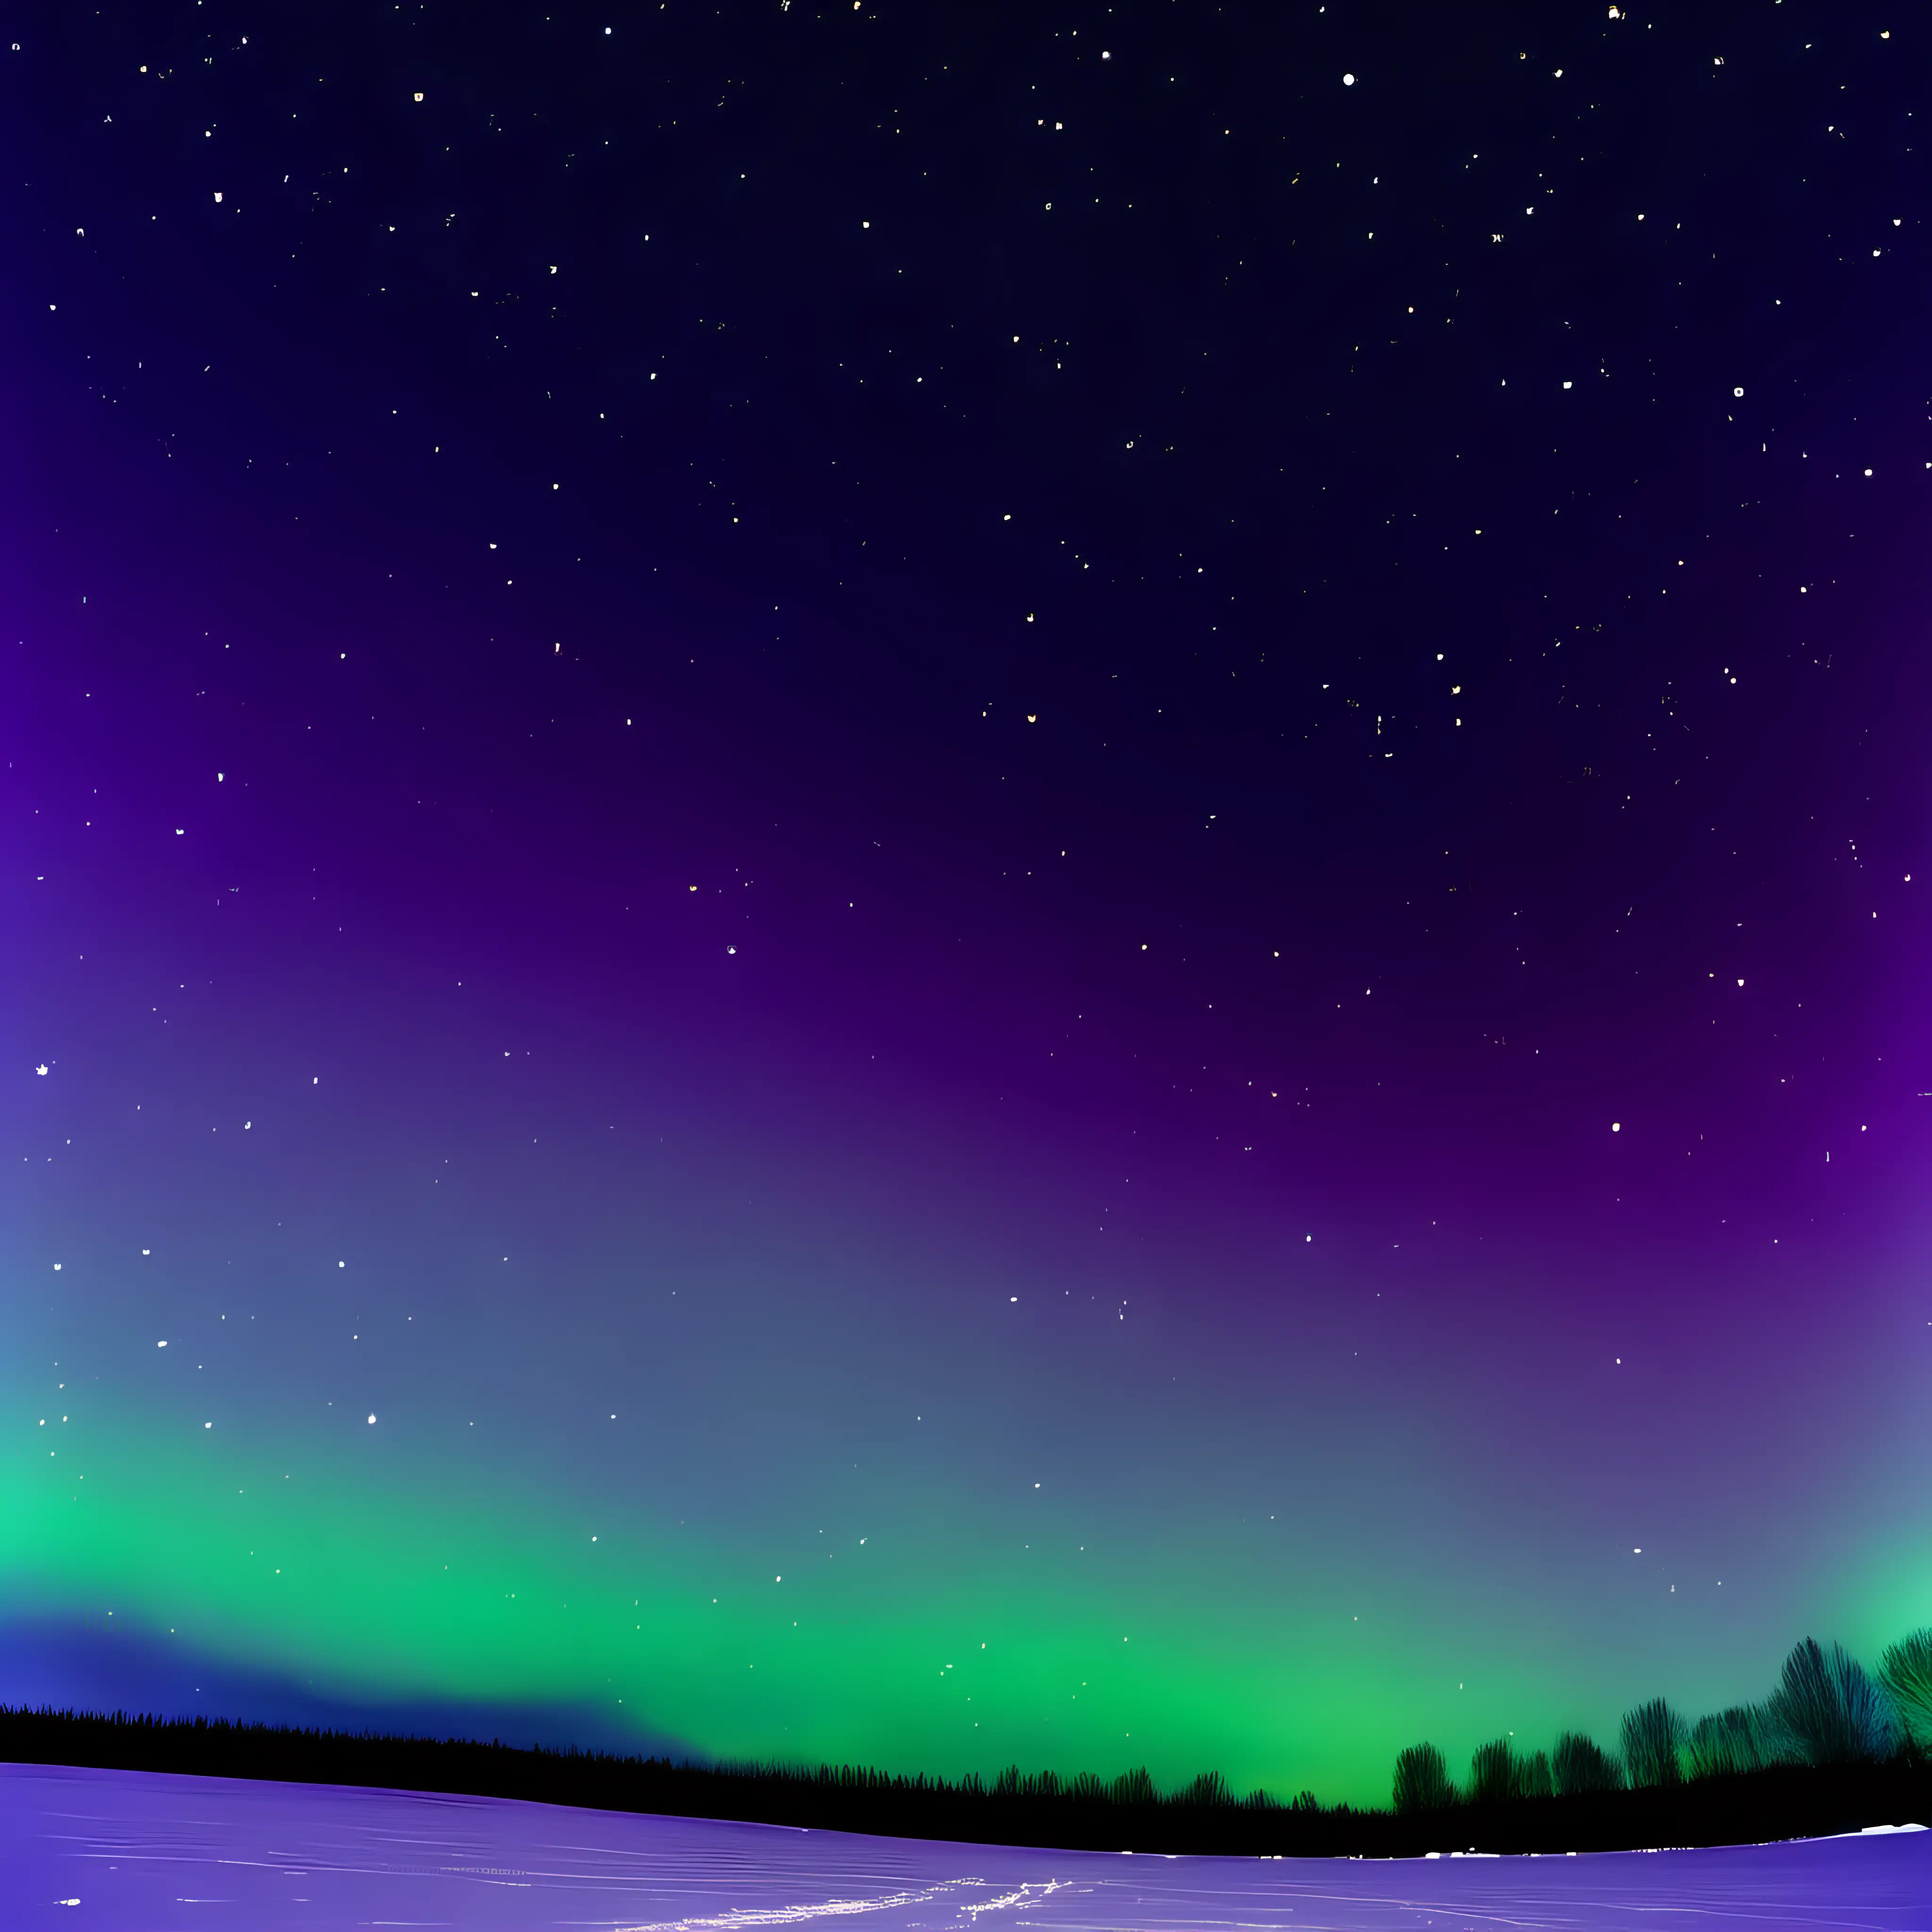 northern light skies, purples and green and whites only, with a lot of stars, sky only, flat horizon, no ground, no mountains, no snow, no trees, no trees, no mountains, no earth, only sky